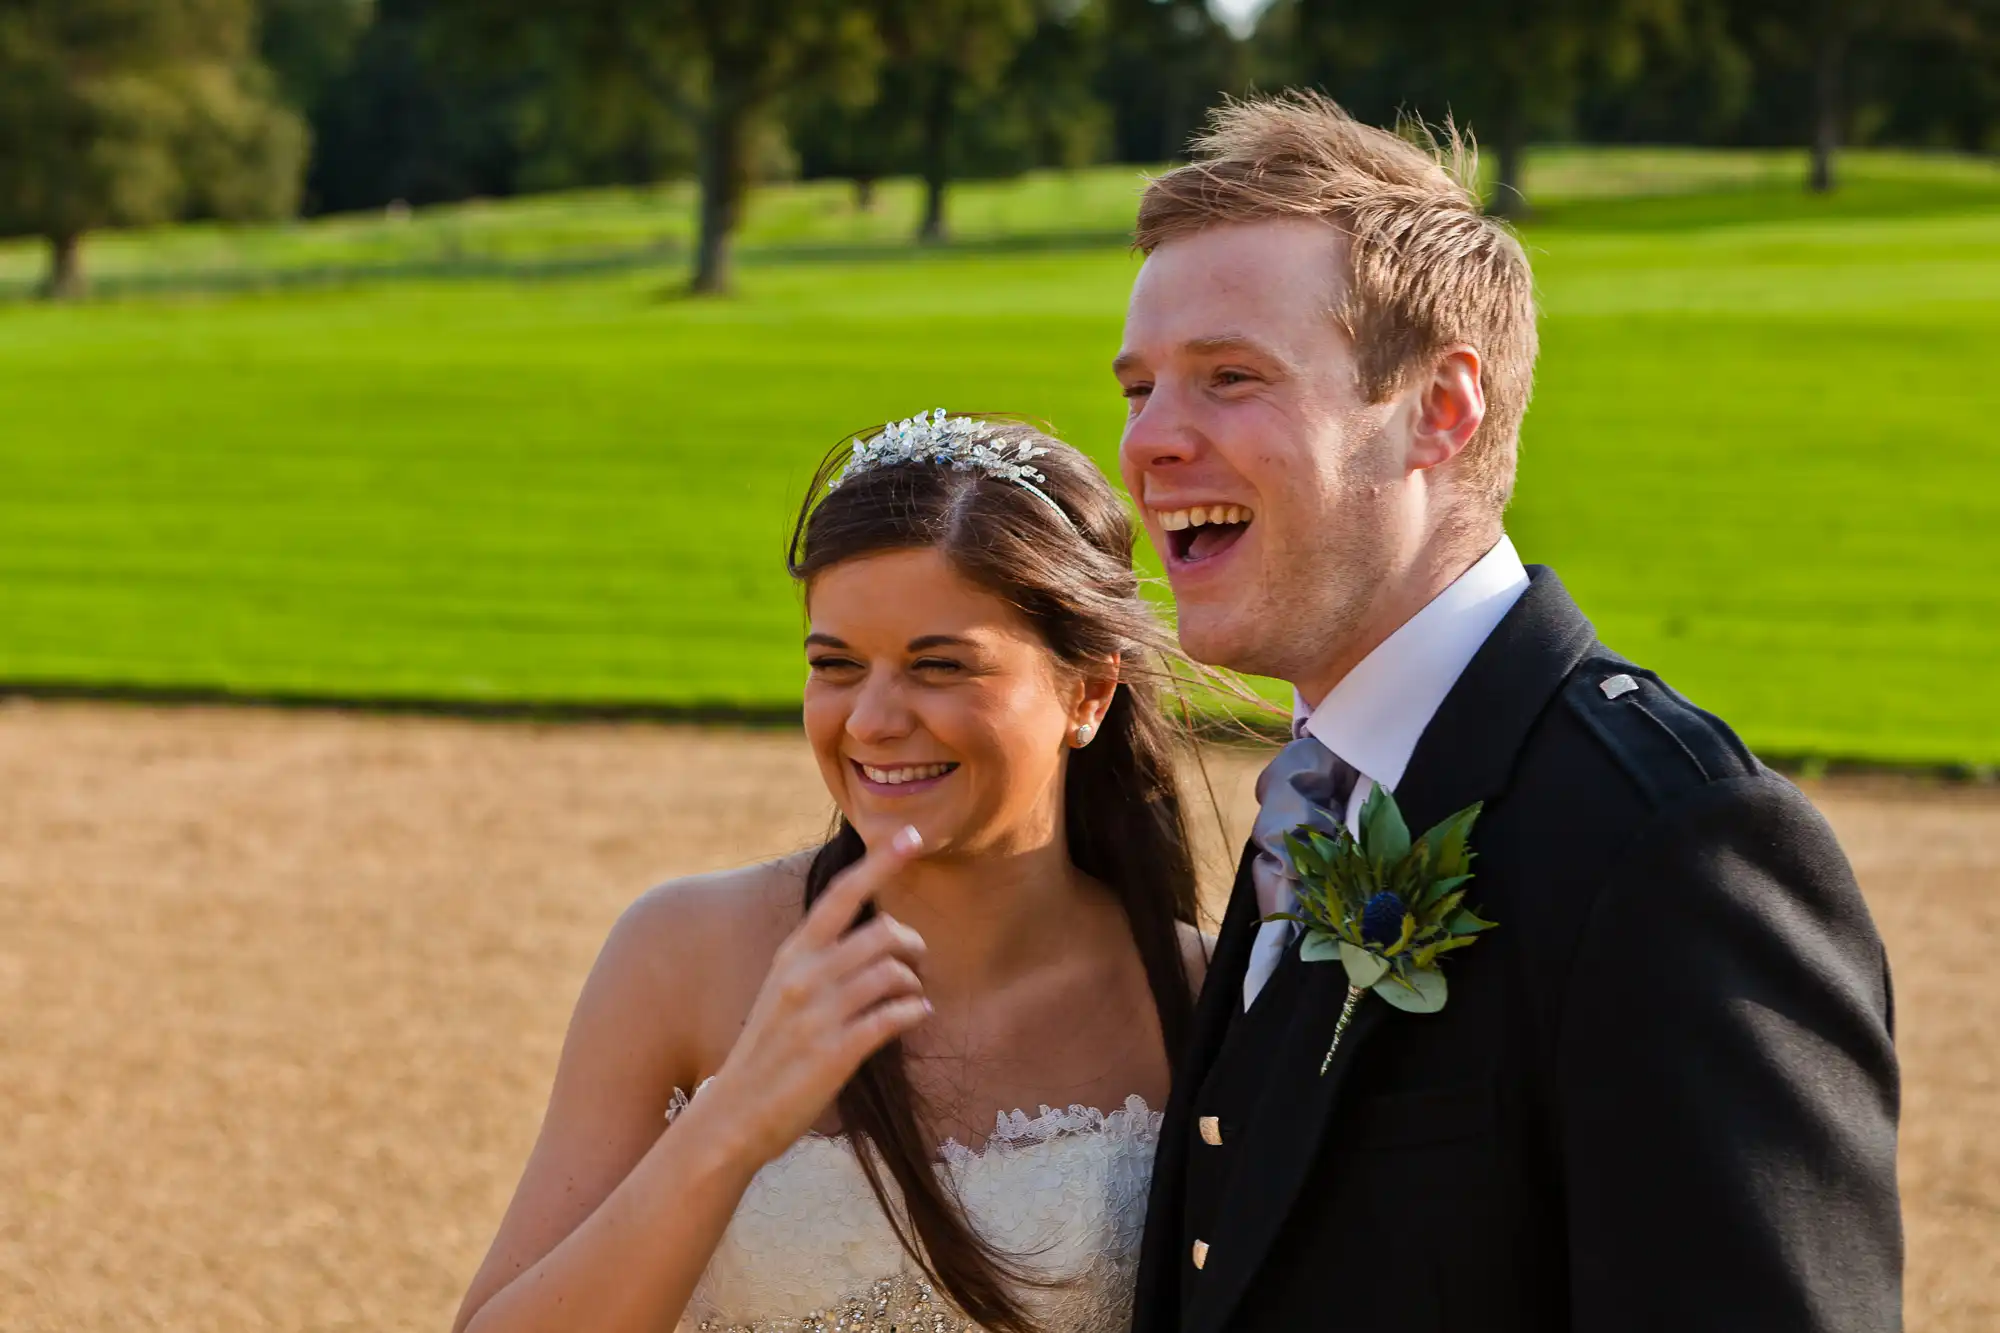 A bride and groom smiling brightly and walking outdoors on a sunny day, with the groom in a black suit and the bride in a white gown.